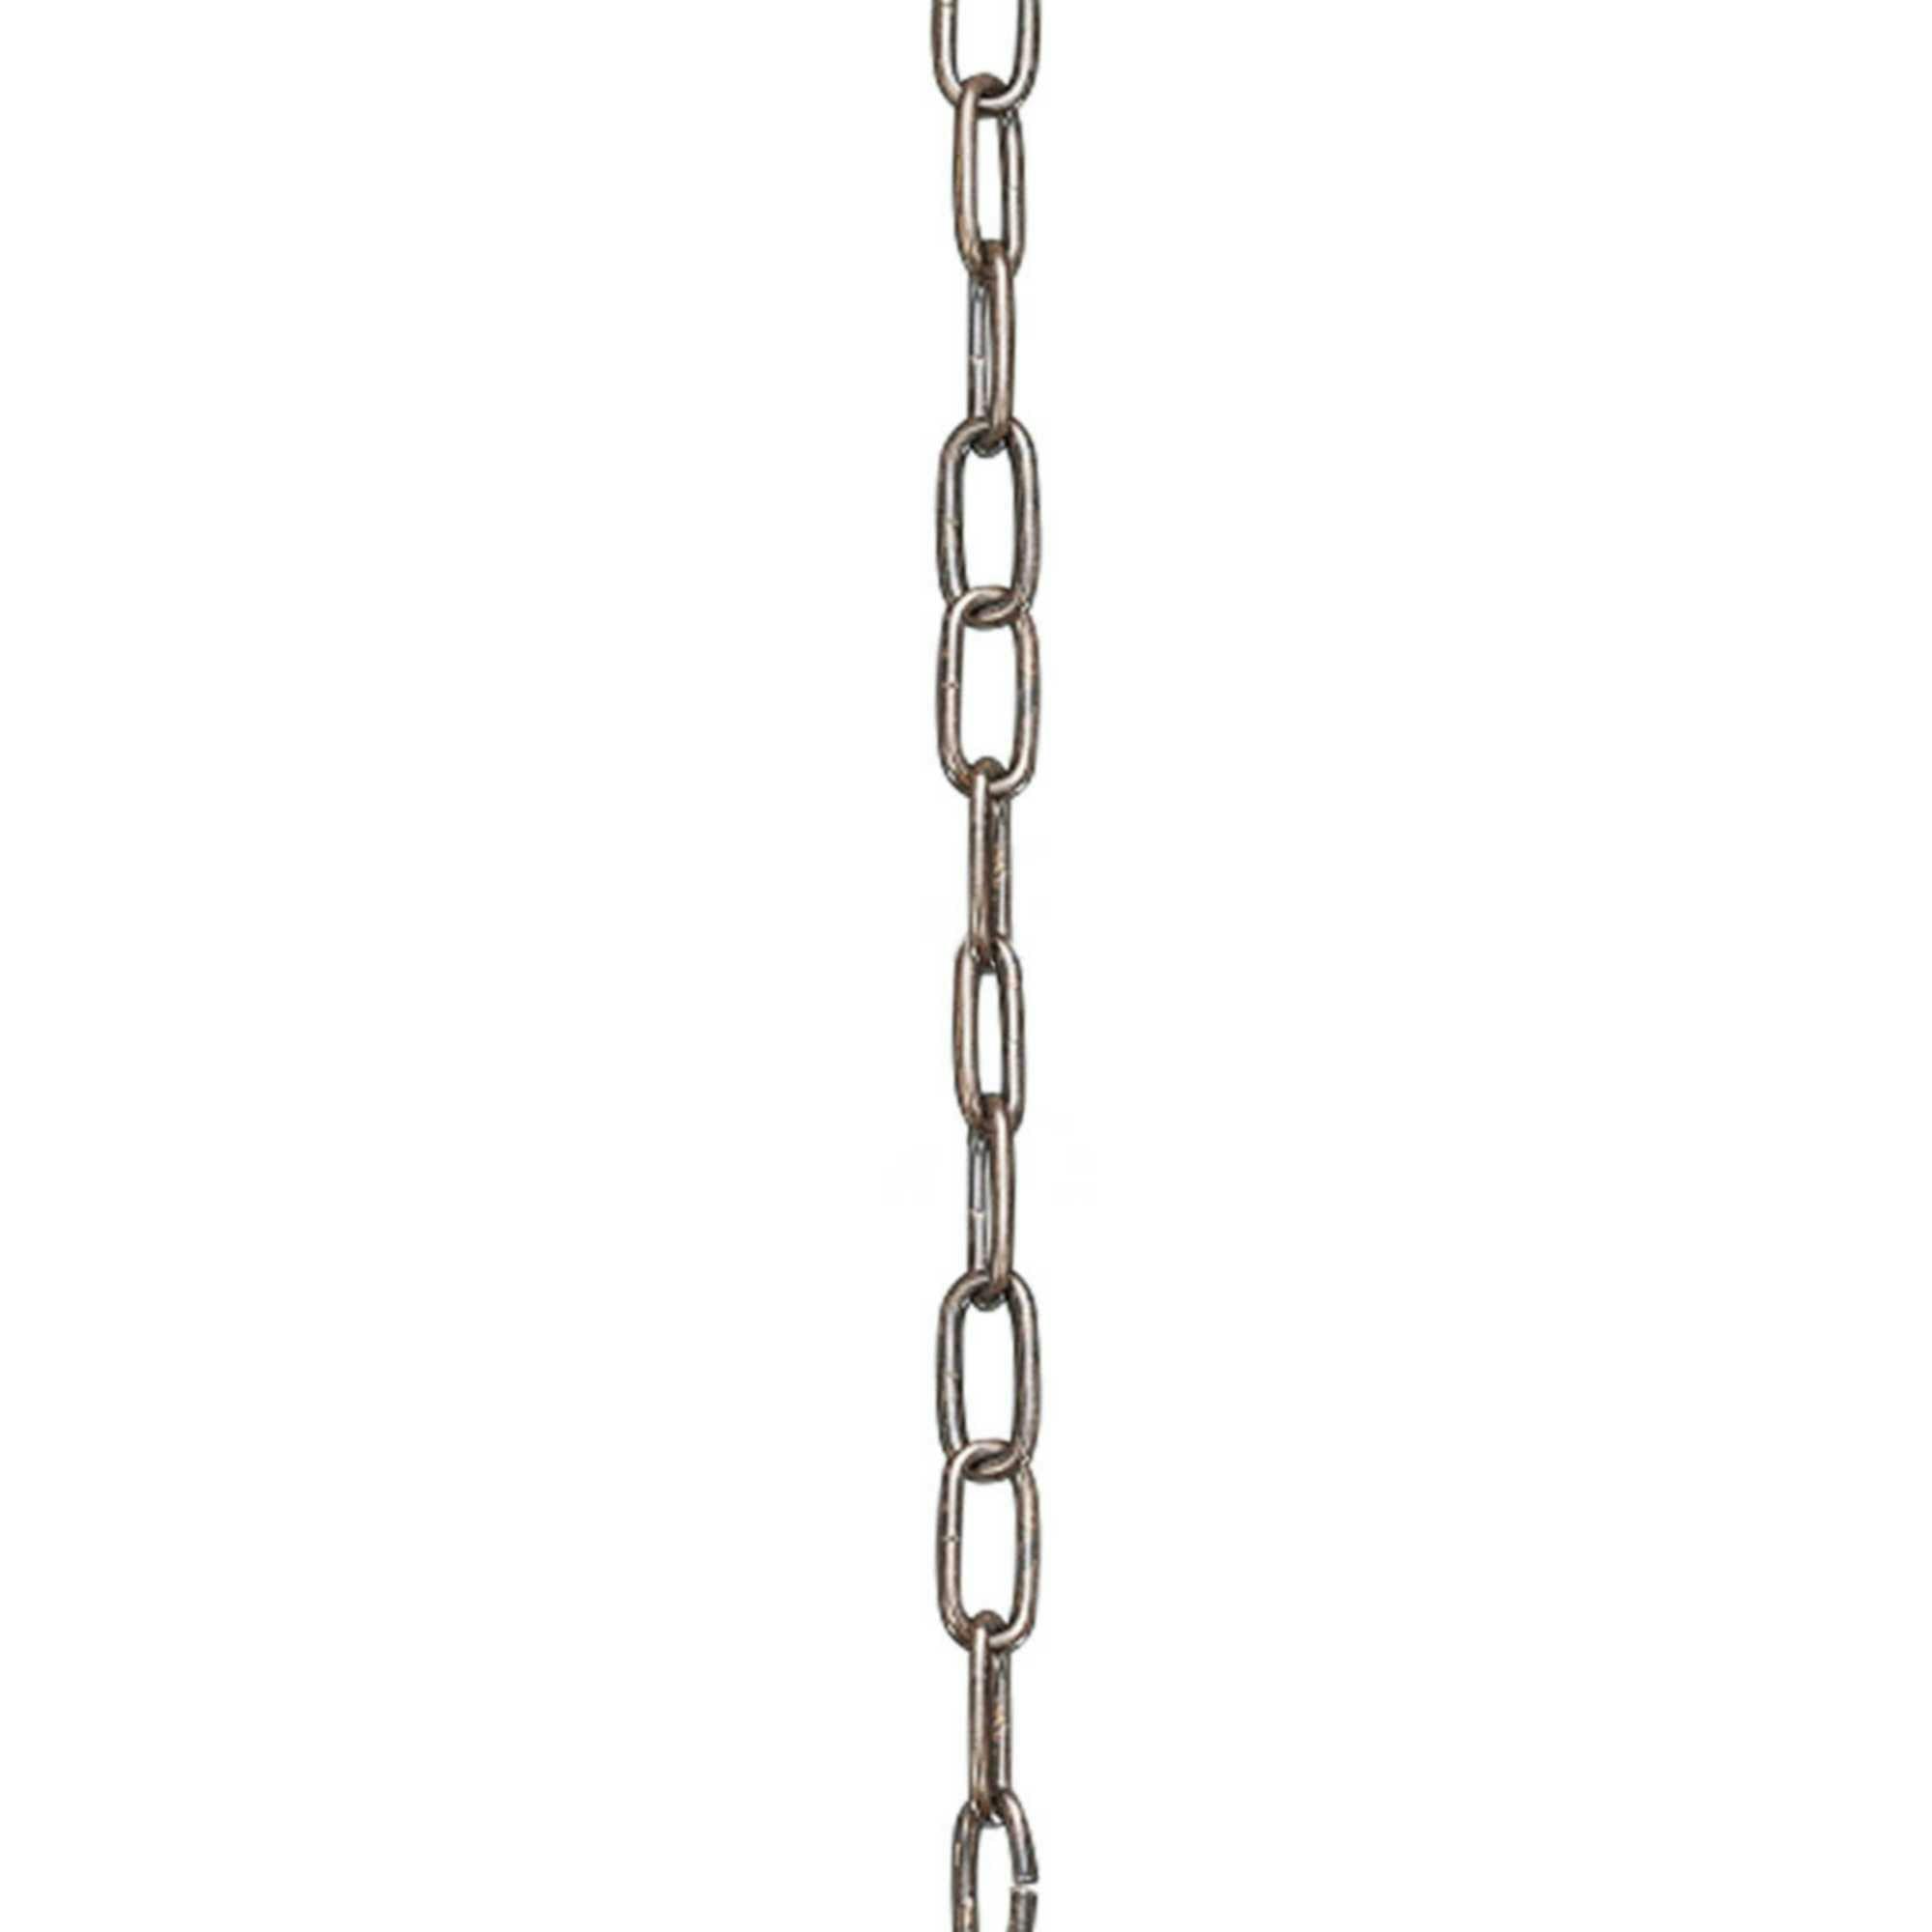 Forged Bronze 10' Heavy-Duty Lighting Fixture Chain